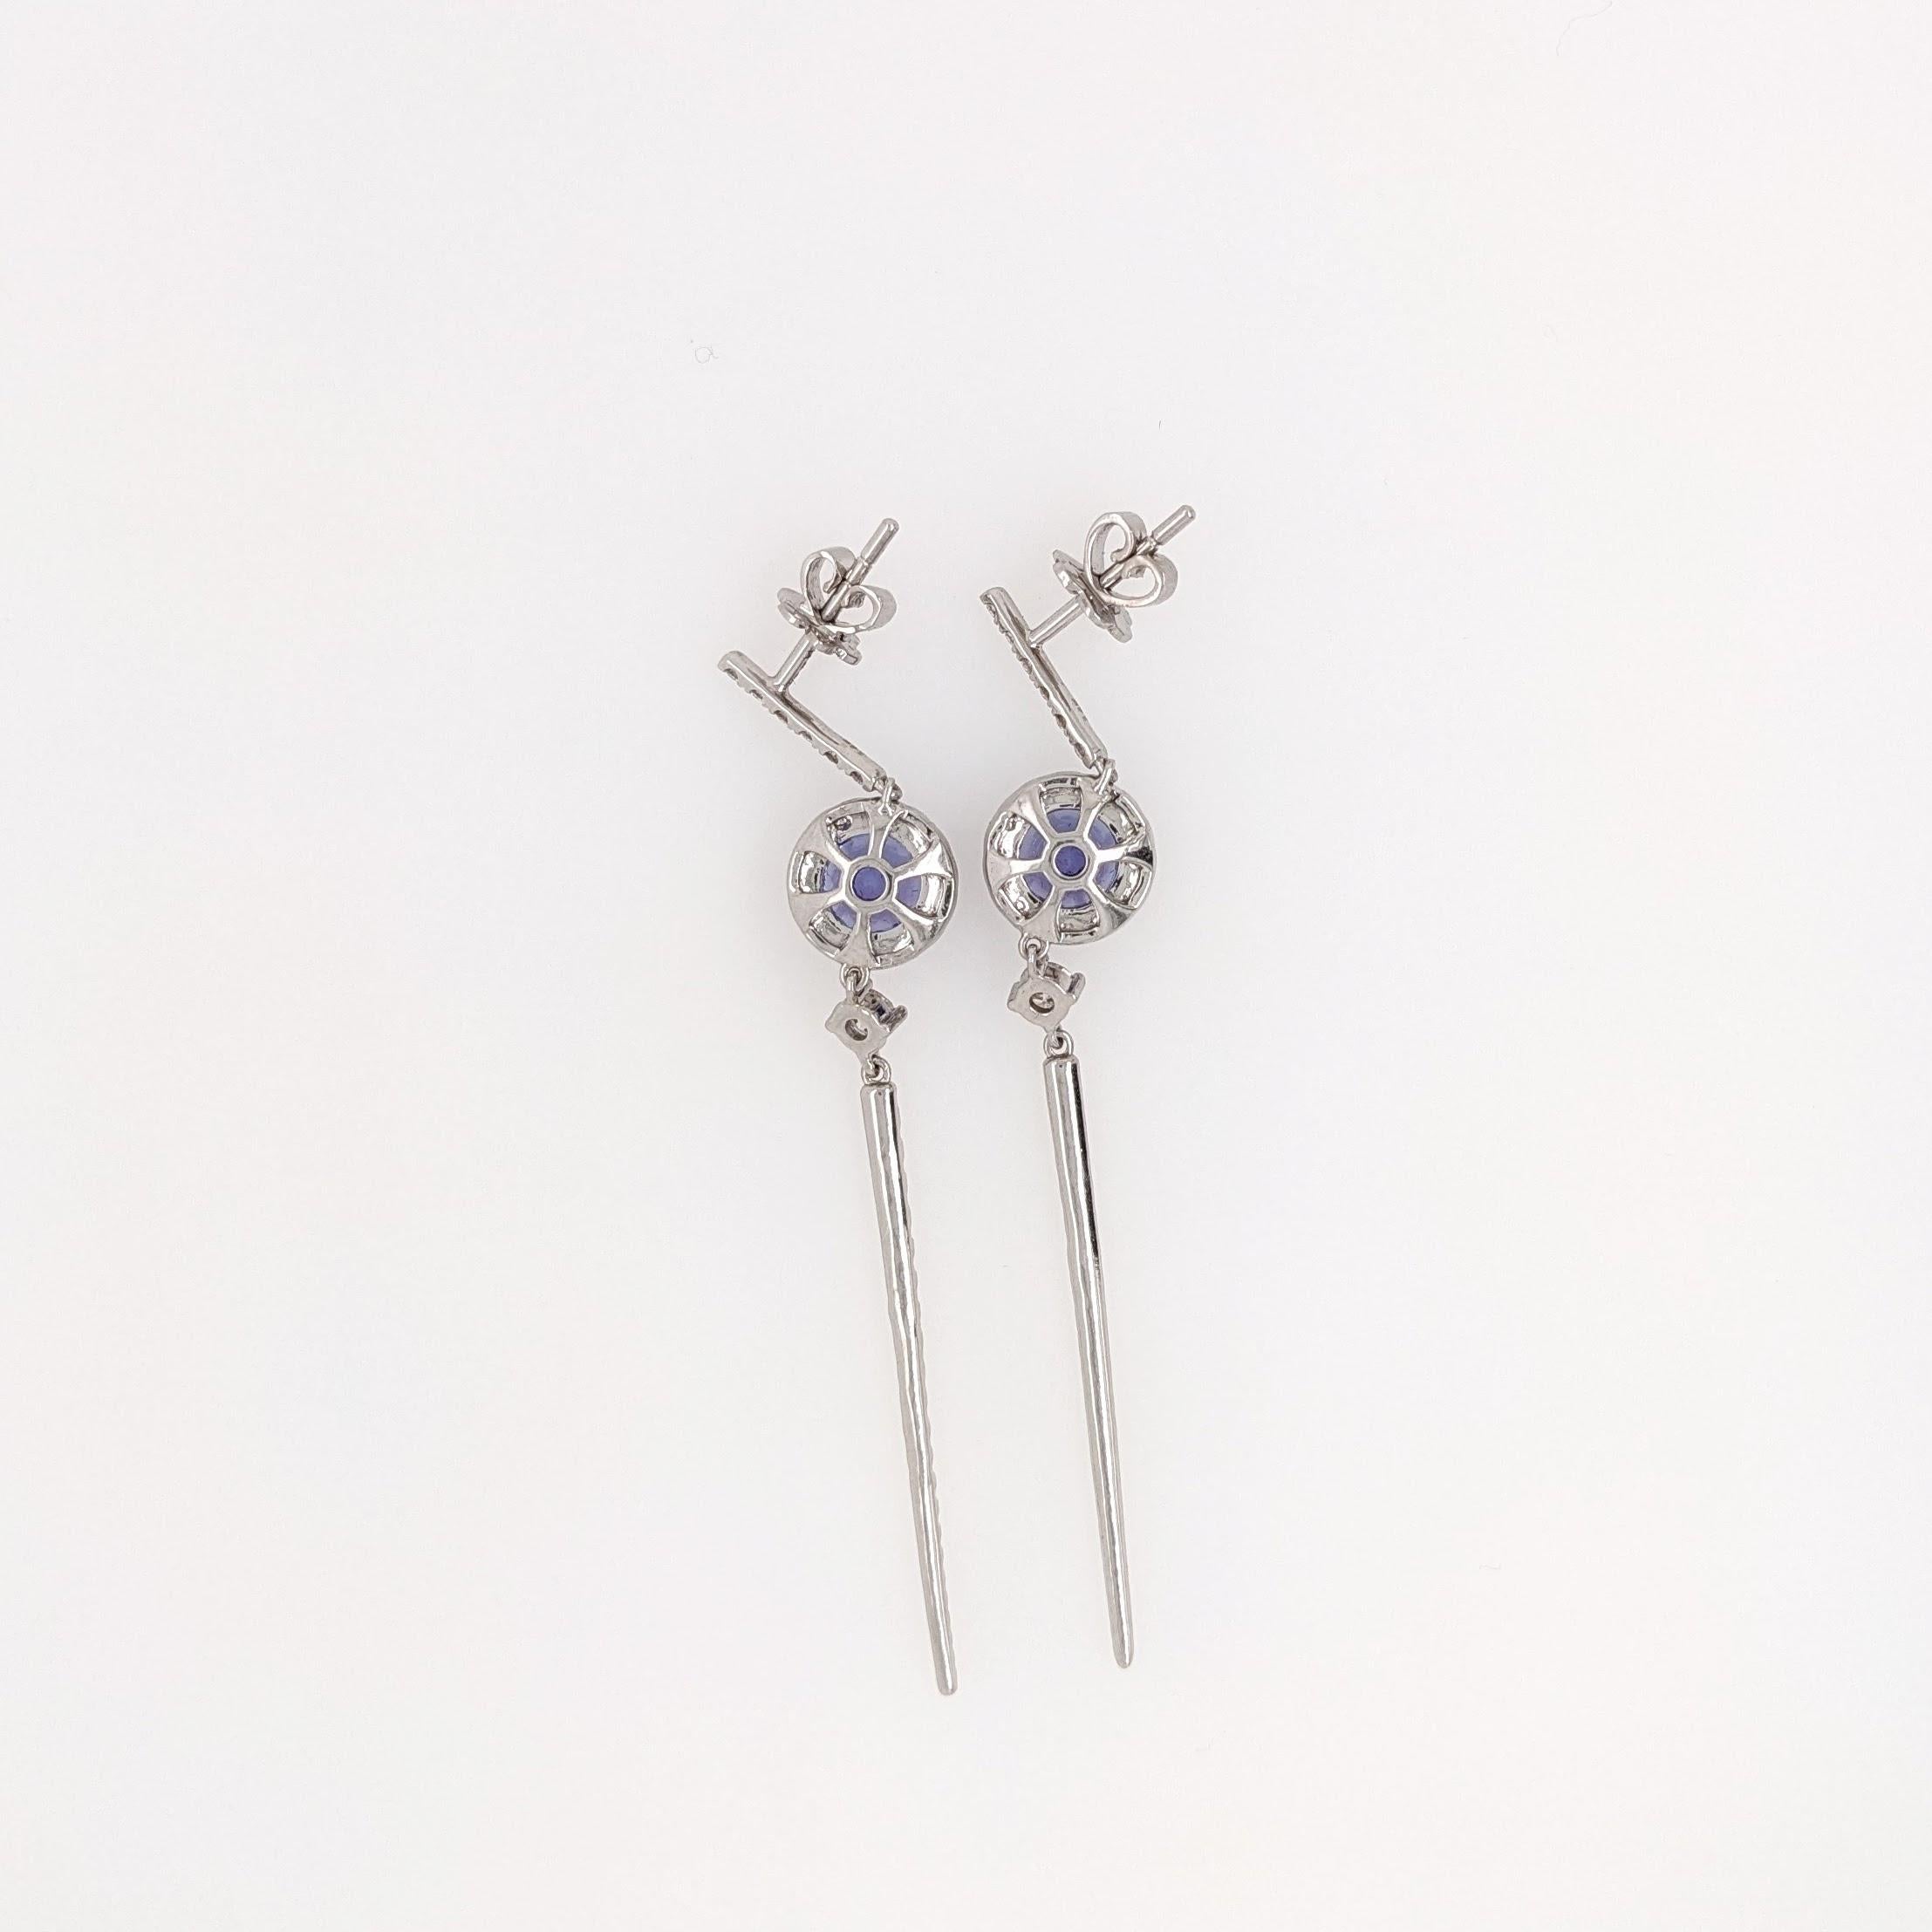 These gorgeous round tanzanite earrings are sure to catch the eye. With 34 natural, earth-mined diamond accents this piece is perfect for a wedding or any special occasion. These earrings are ready to ship as shown, or available to be customized